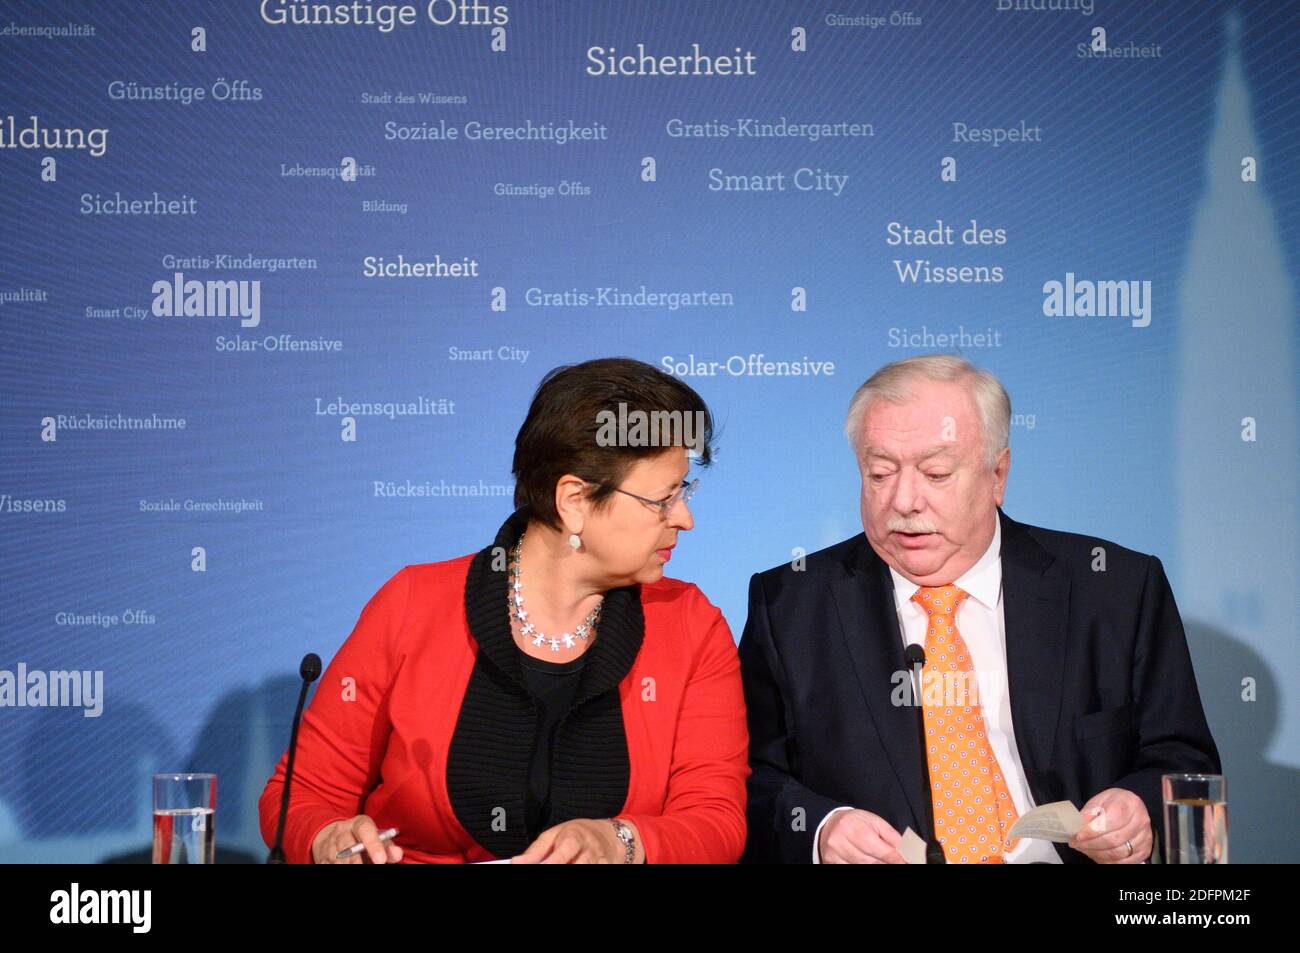 Austria Vienna. February 12, 2013. Michael Häupl is an Austrian politician (SPÖ- Social Democratic Party of Austria) and was Mayor and Governor of Vienna from November 7, 1994 to May 24, 2018. Picture shows Renate Brauner (L) and Michael Häupl (R). Stock Photo